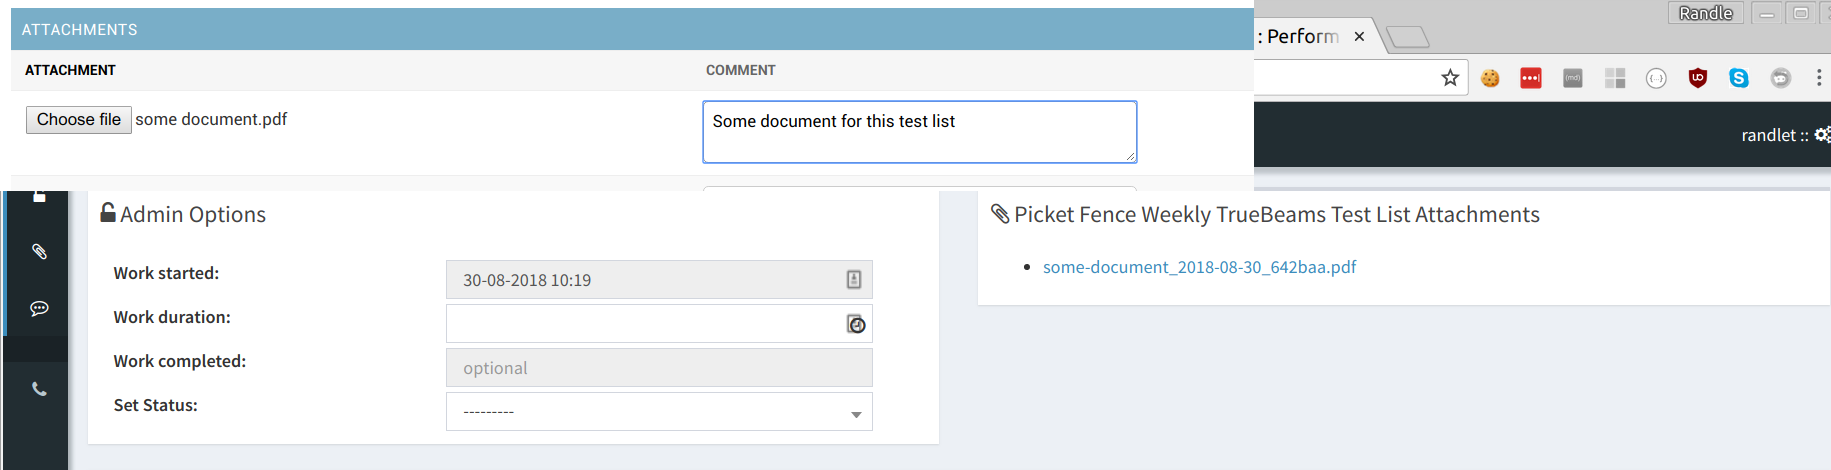 Adding attachments to Test Lists